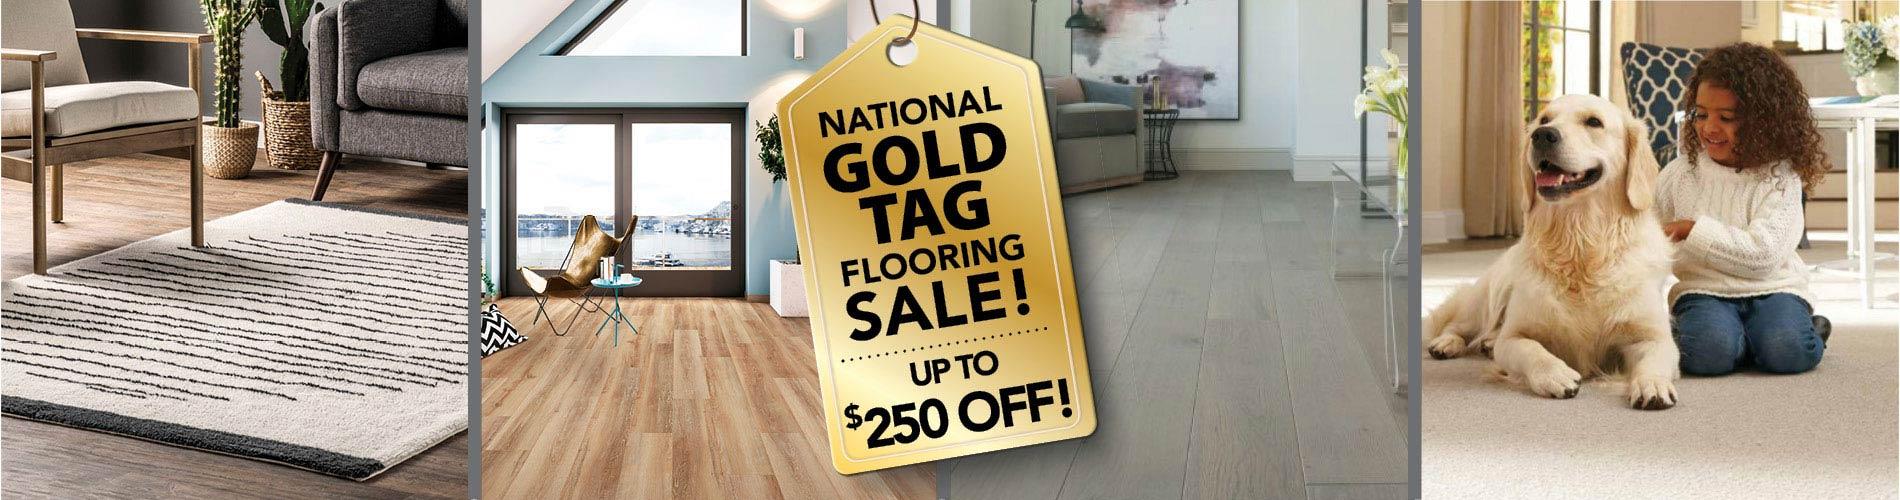 National Gold Tag Flooring Sale! Up to $250 Off!